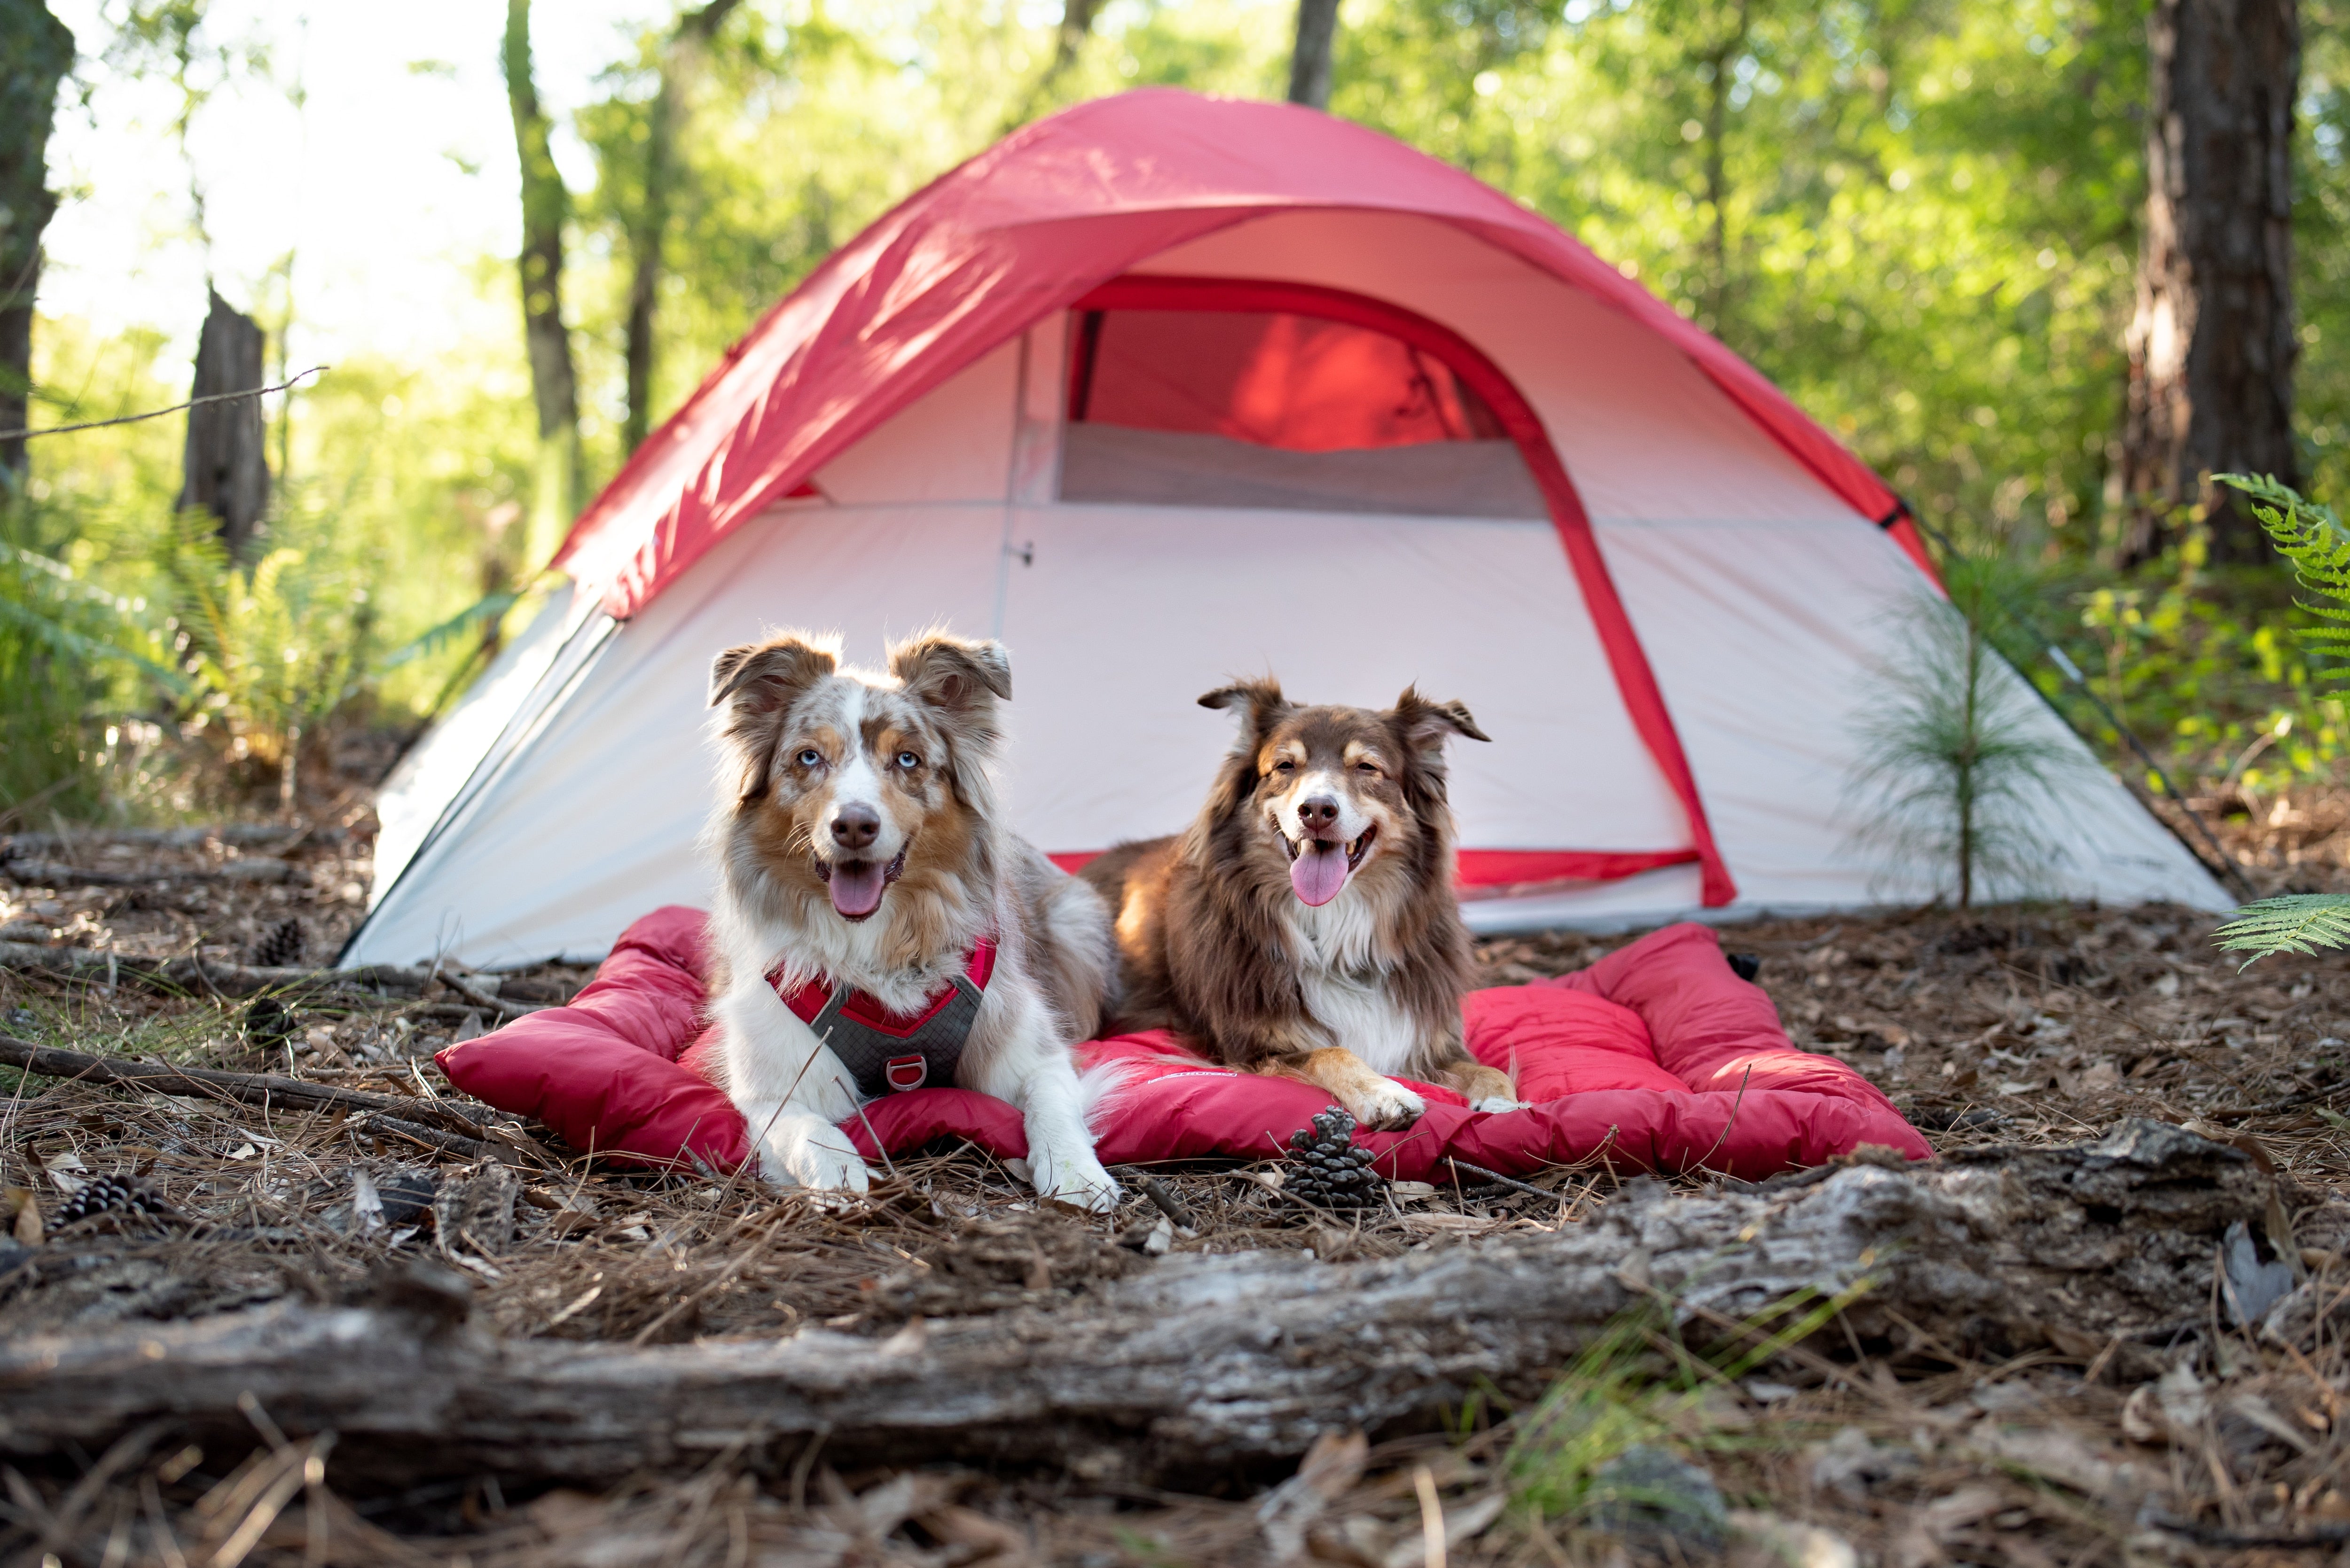 How to prep for a camping trip with your dog - Kurgo Dog Products